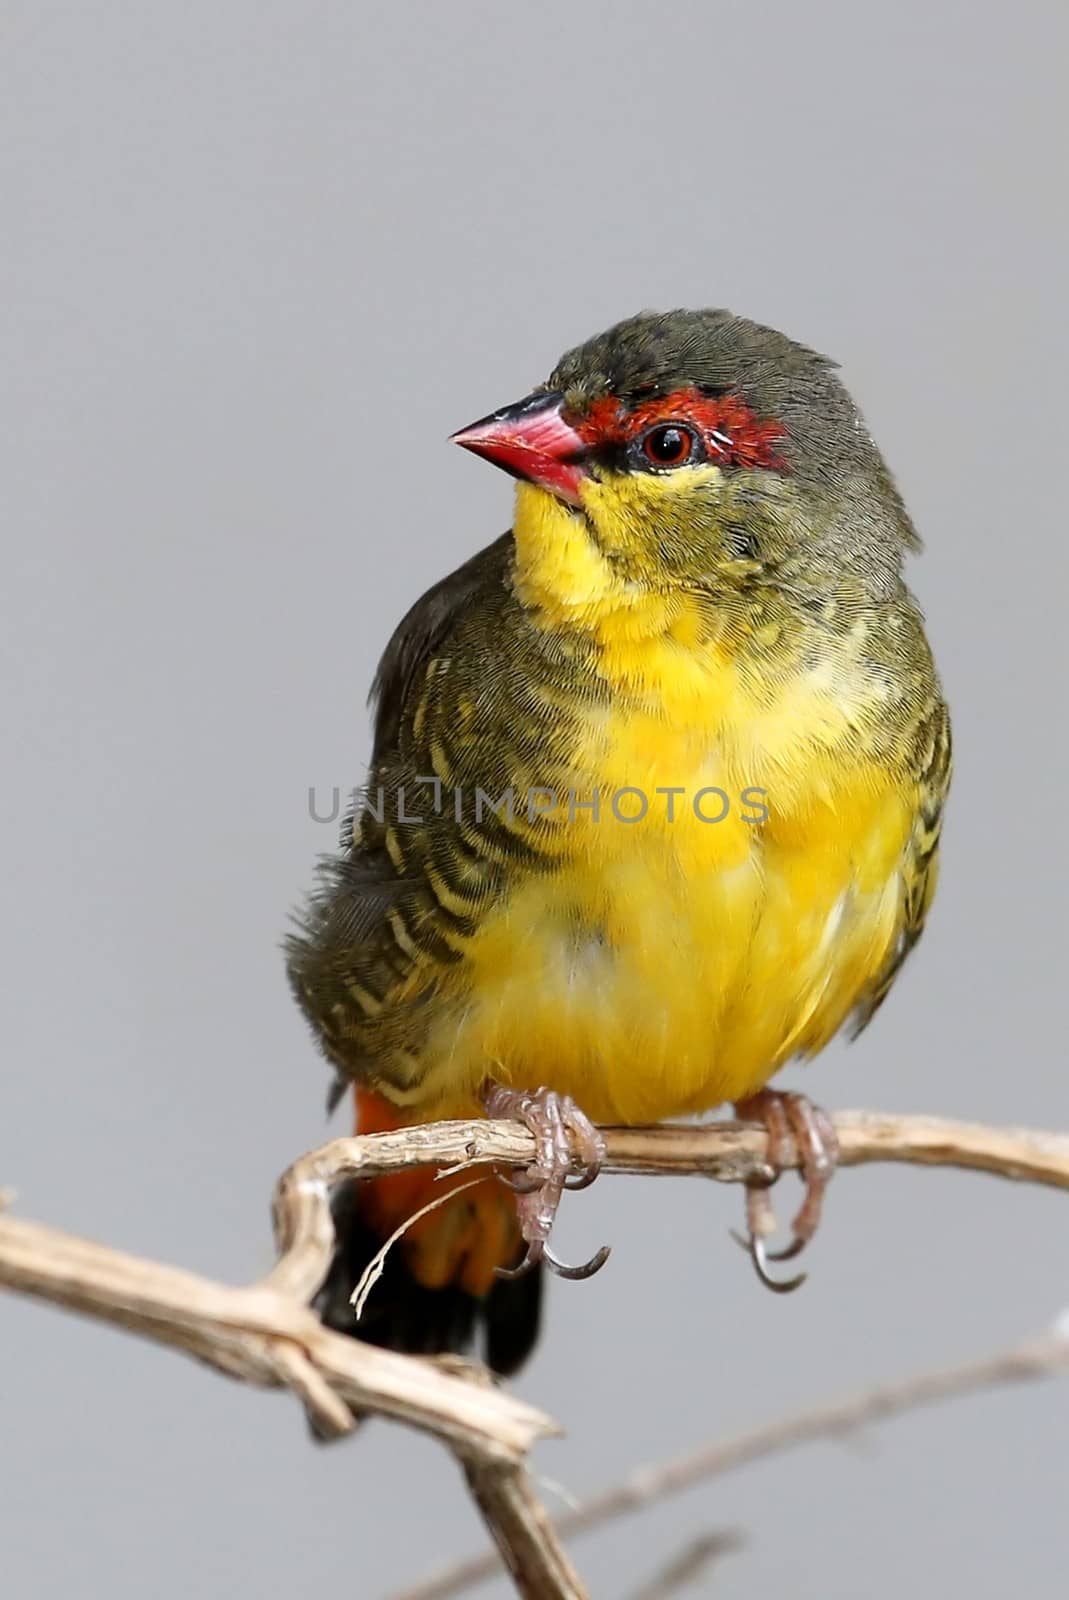 Small and beautiful Orange-Breasted Waxbill bird from Southern Africa